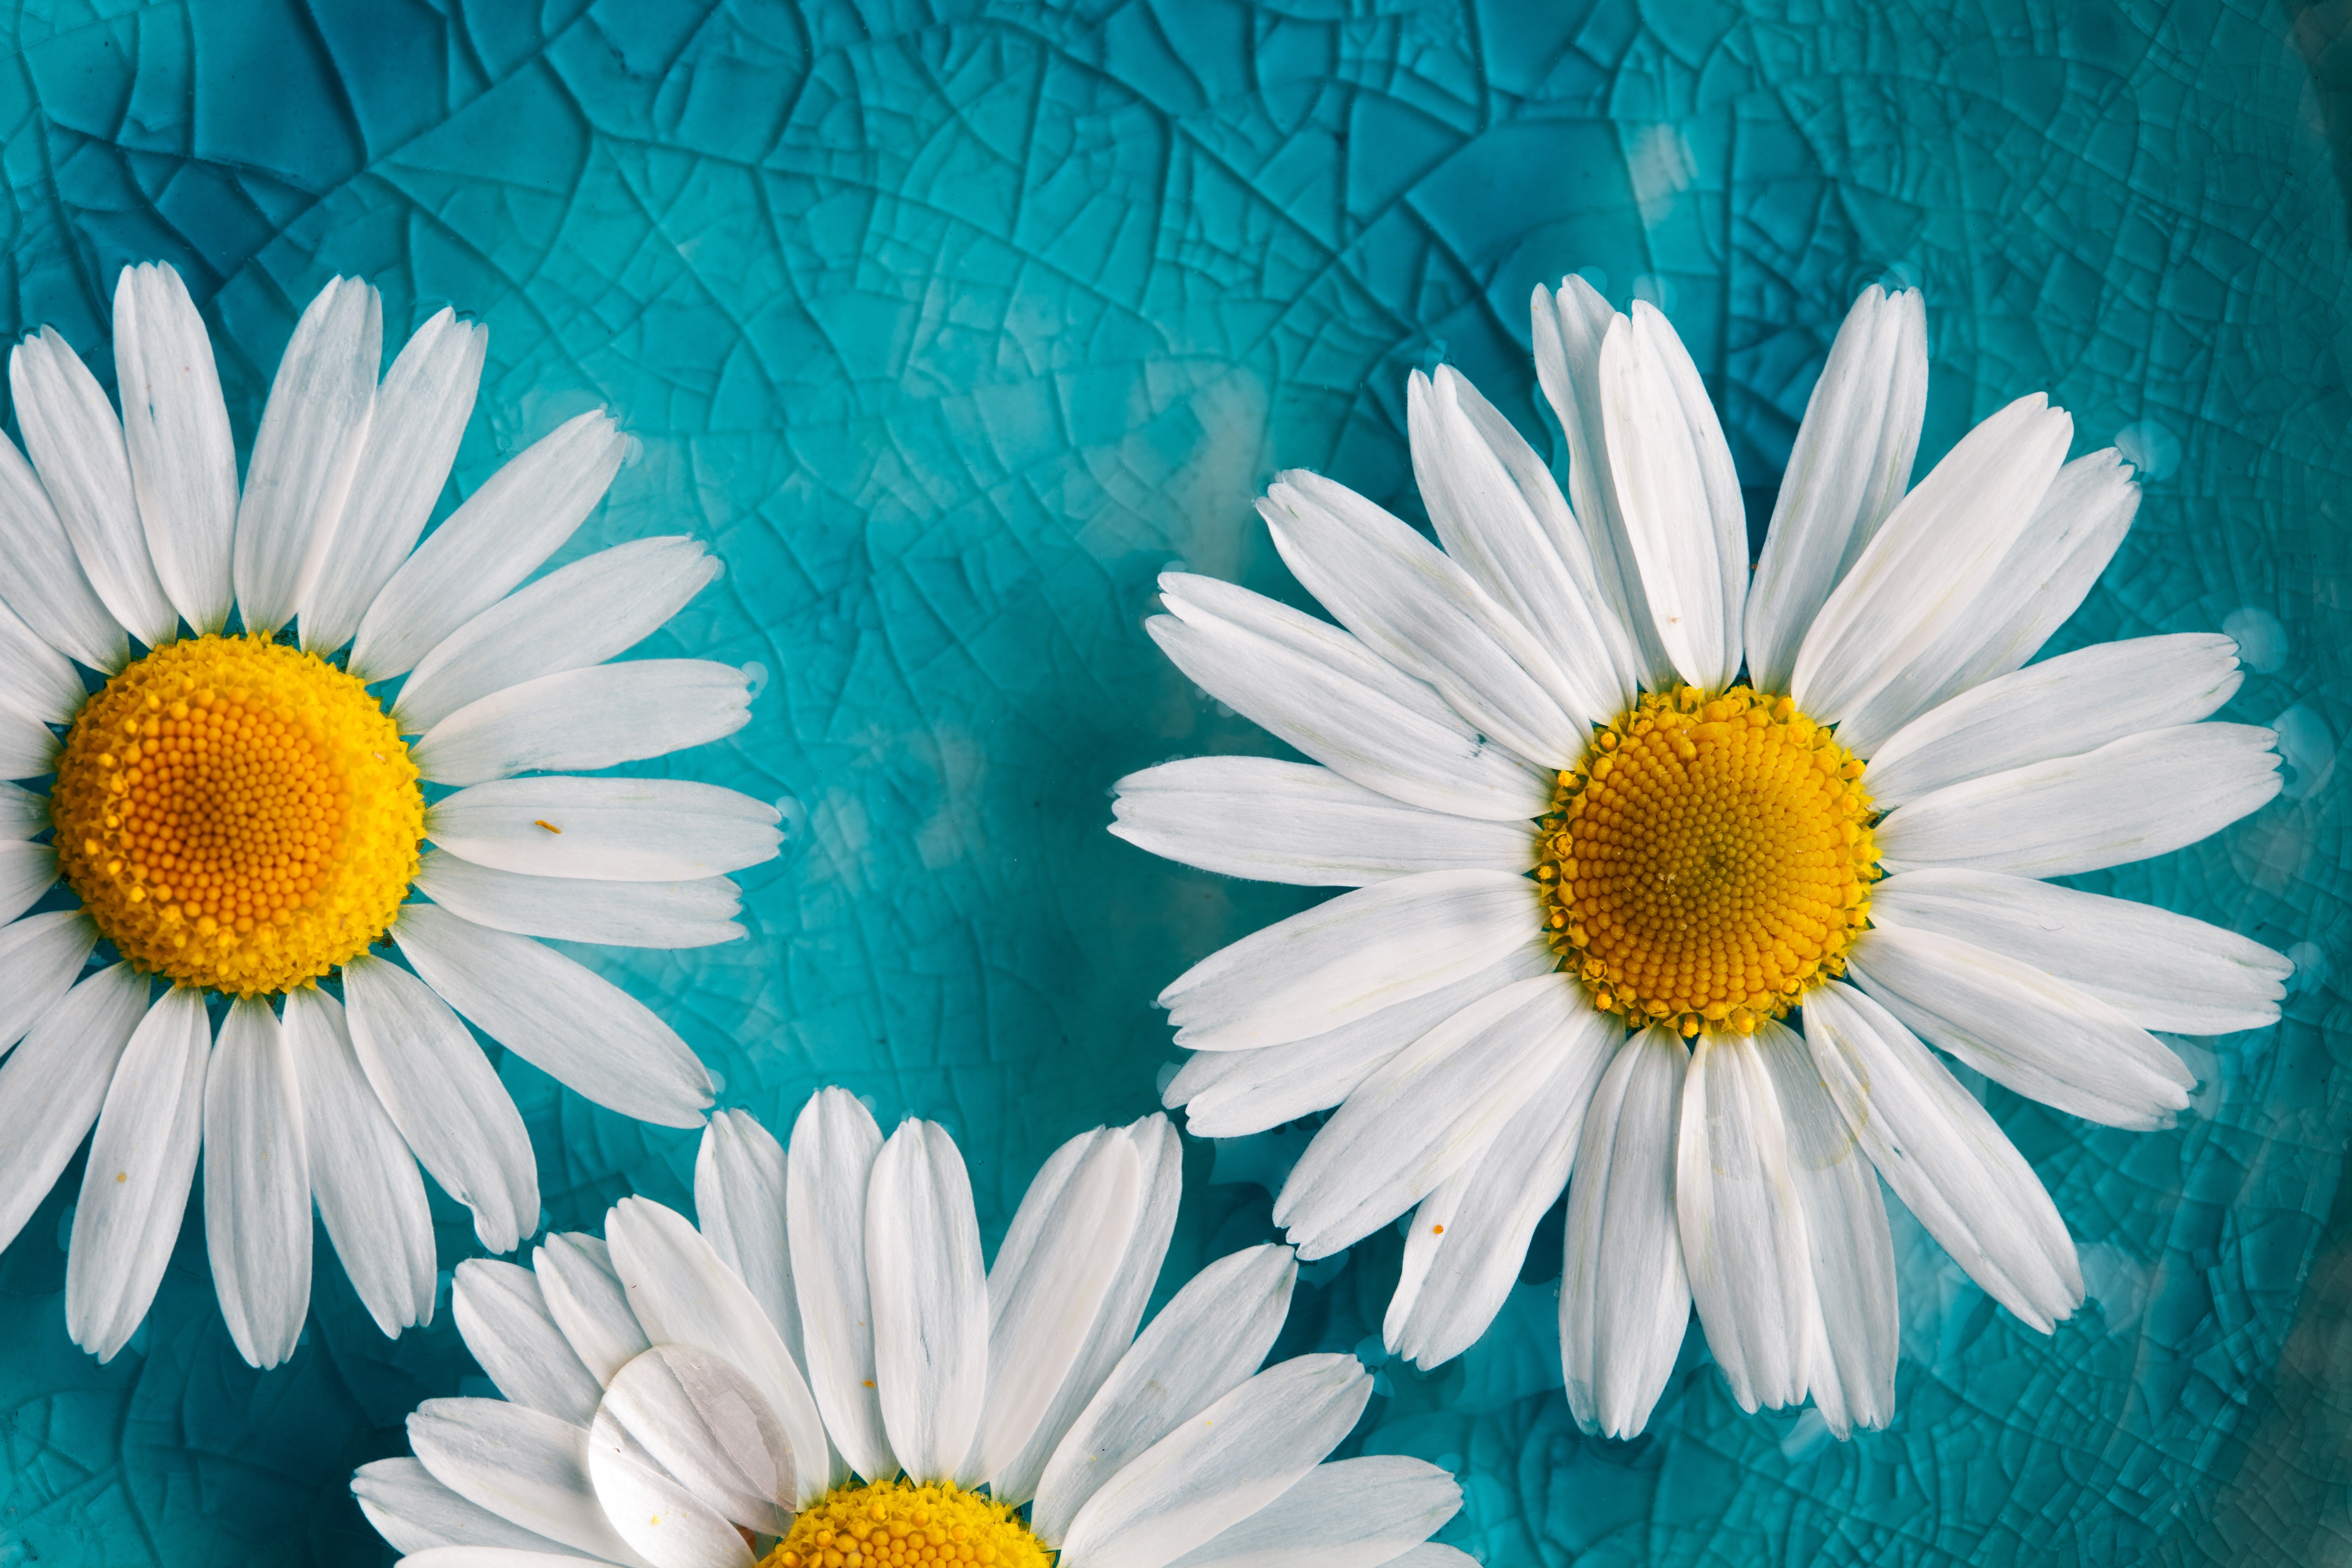 camomile, daisy, glass, earth, blue, flower, nature, white flower, flowers